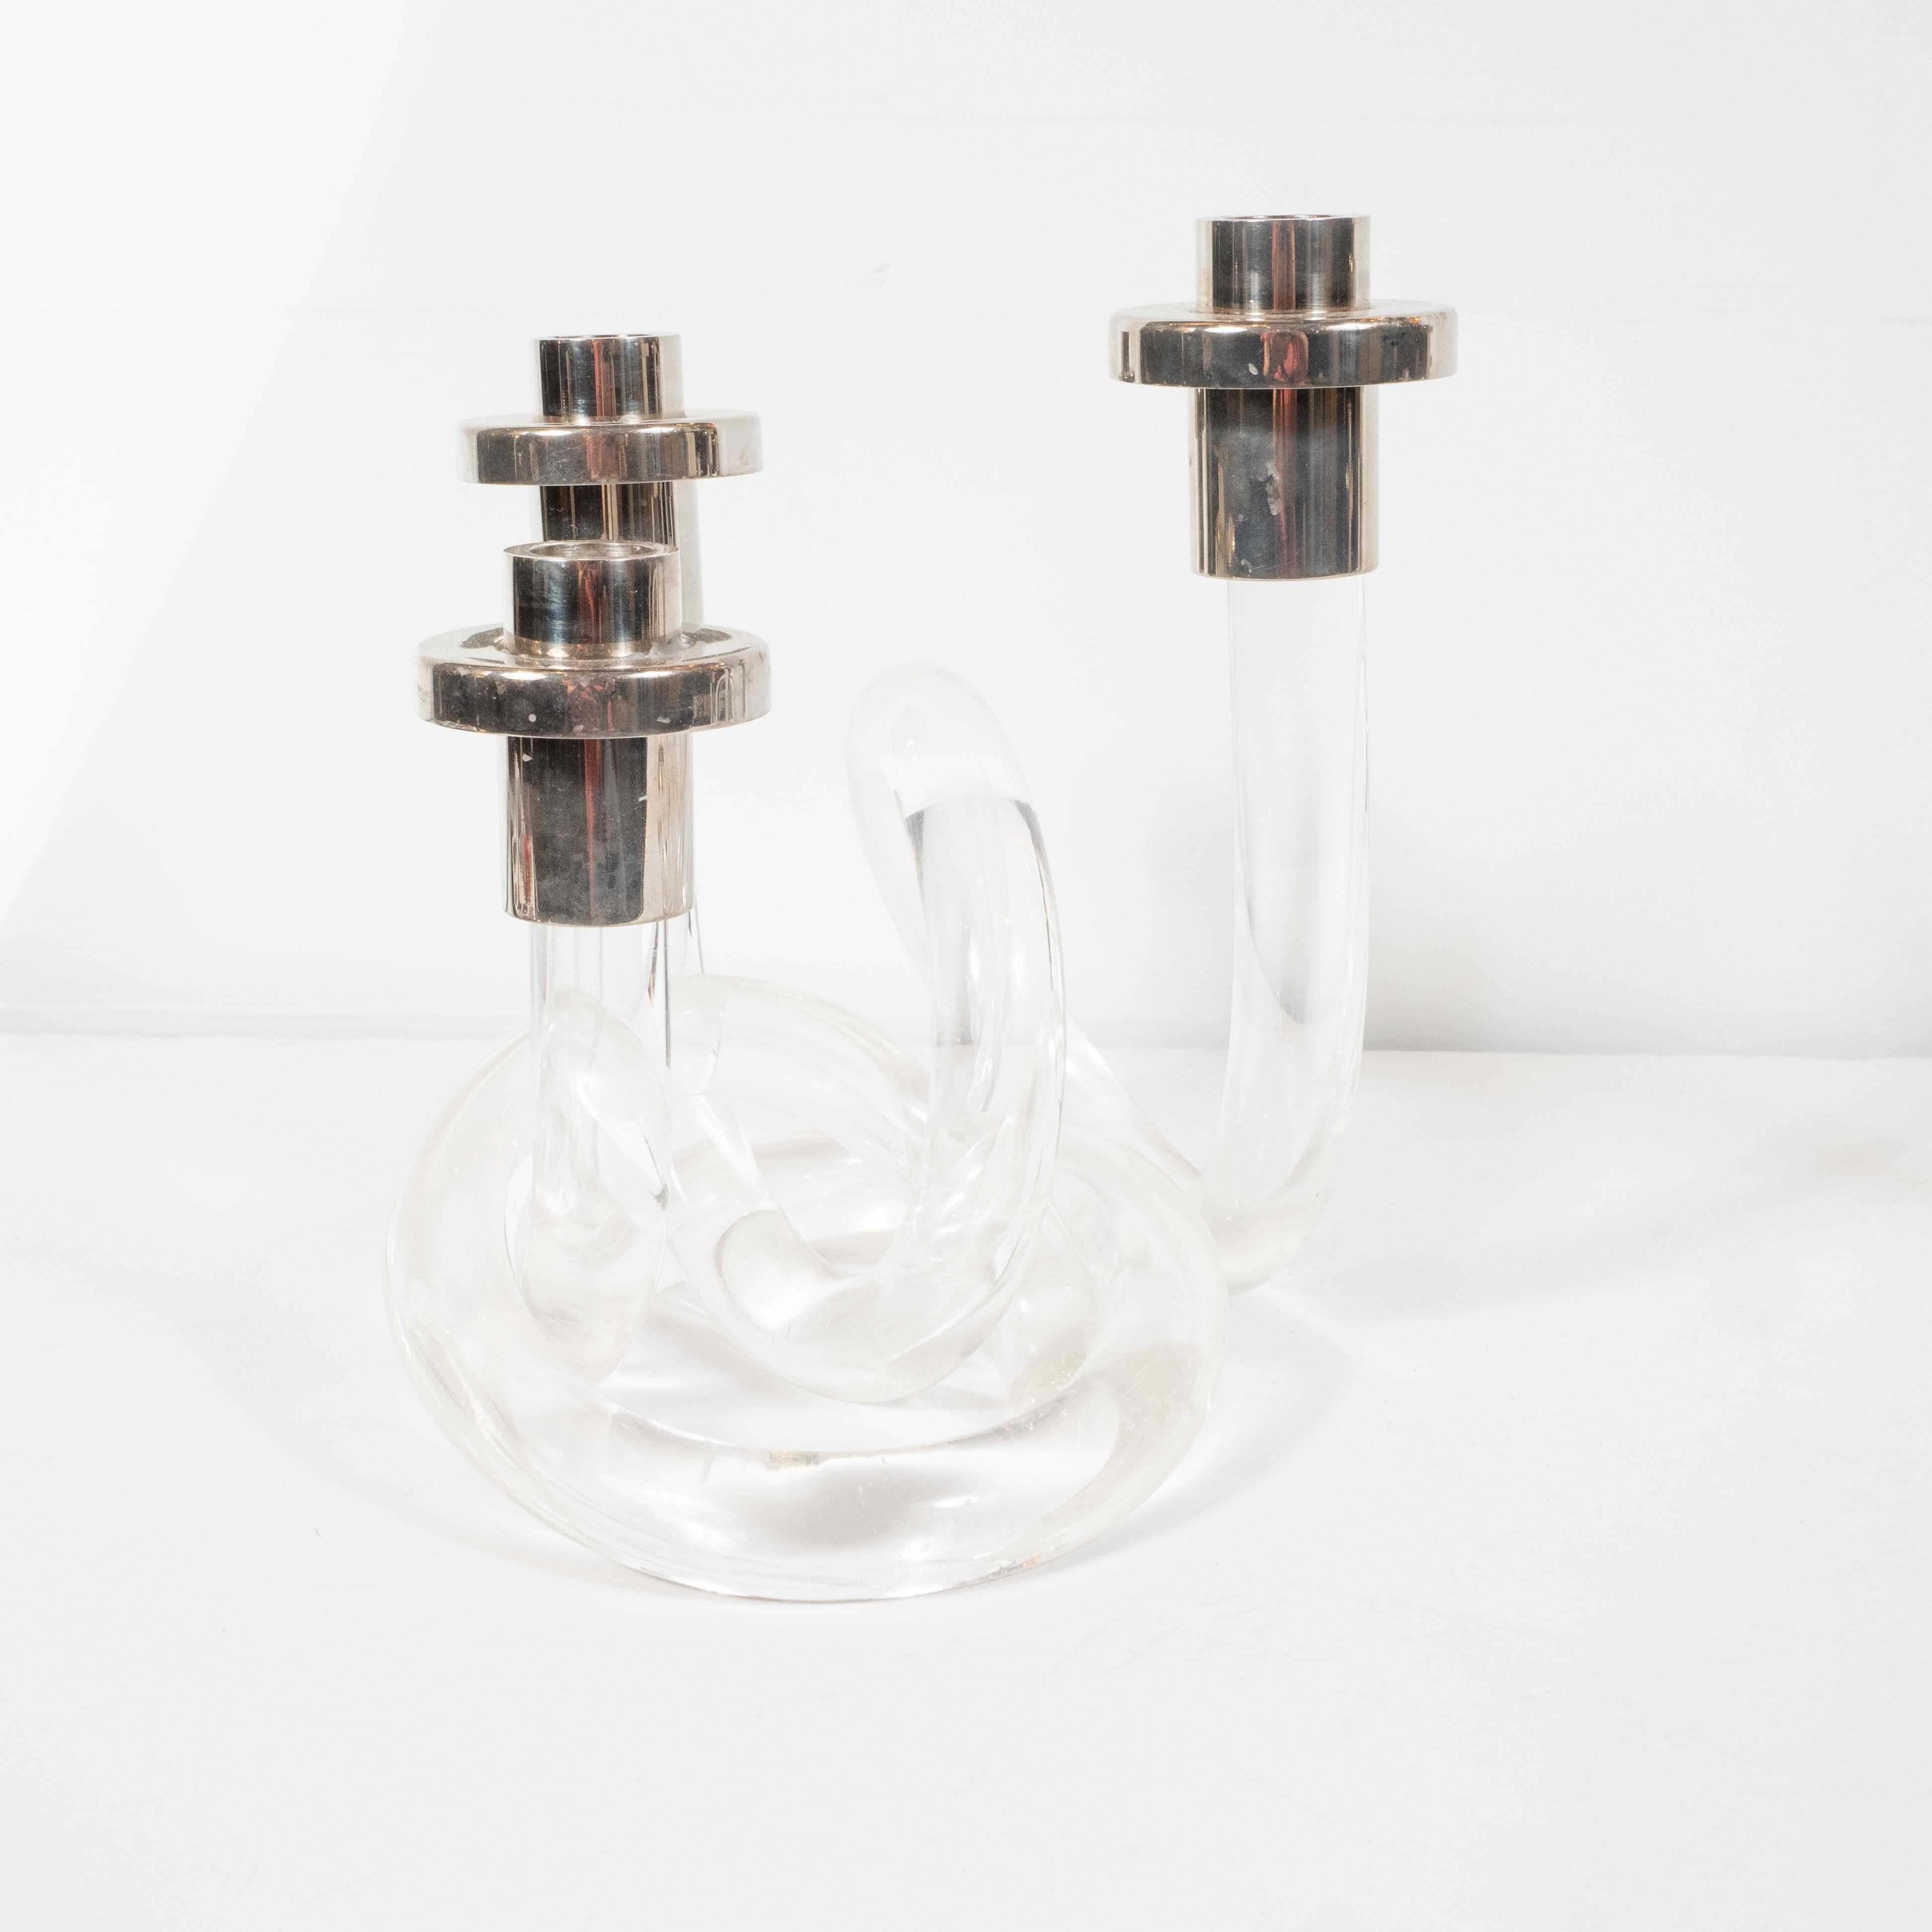 Pair of Midcentury Lucite and Nickel Candlesticks by Dorothy Thorpe 3